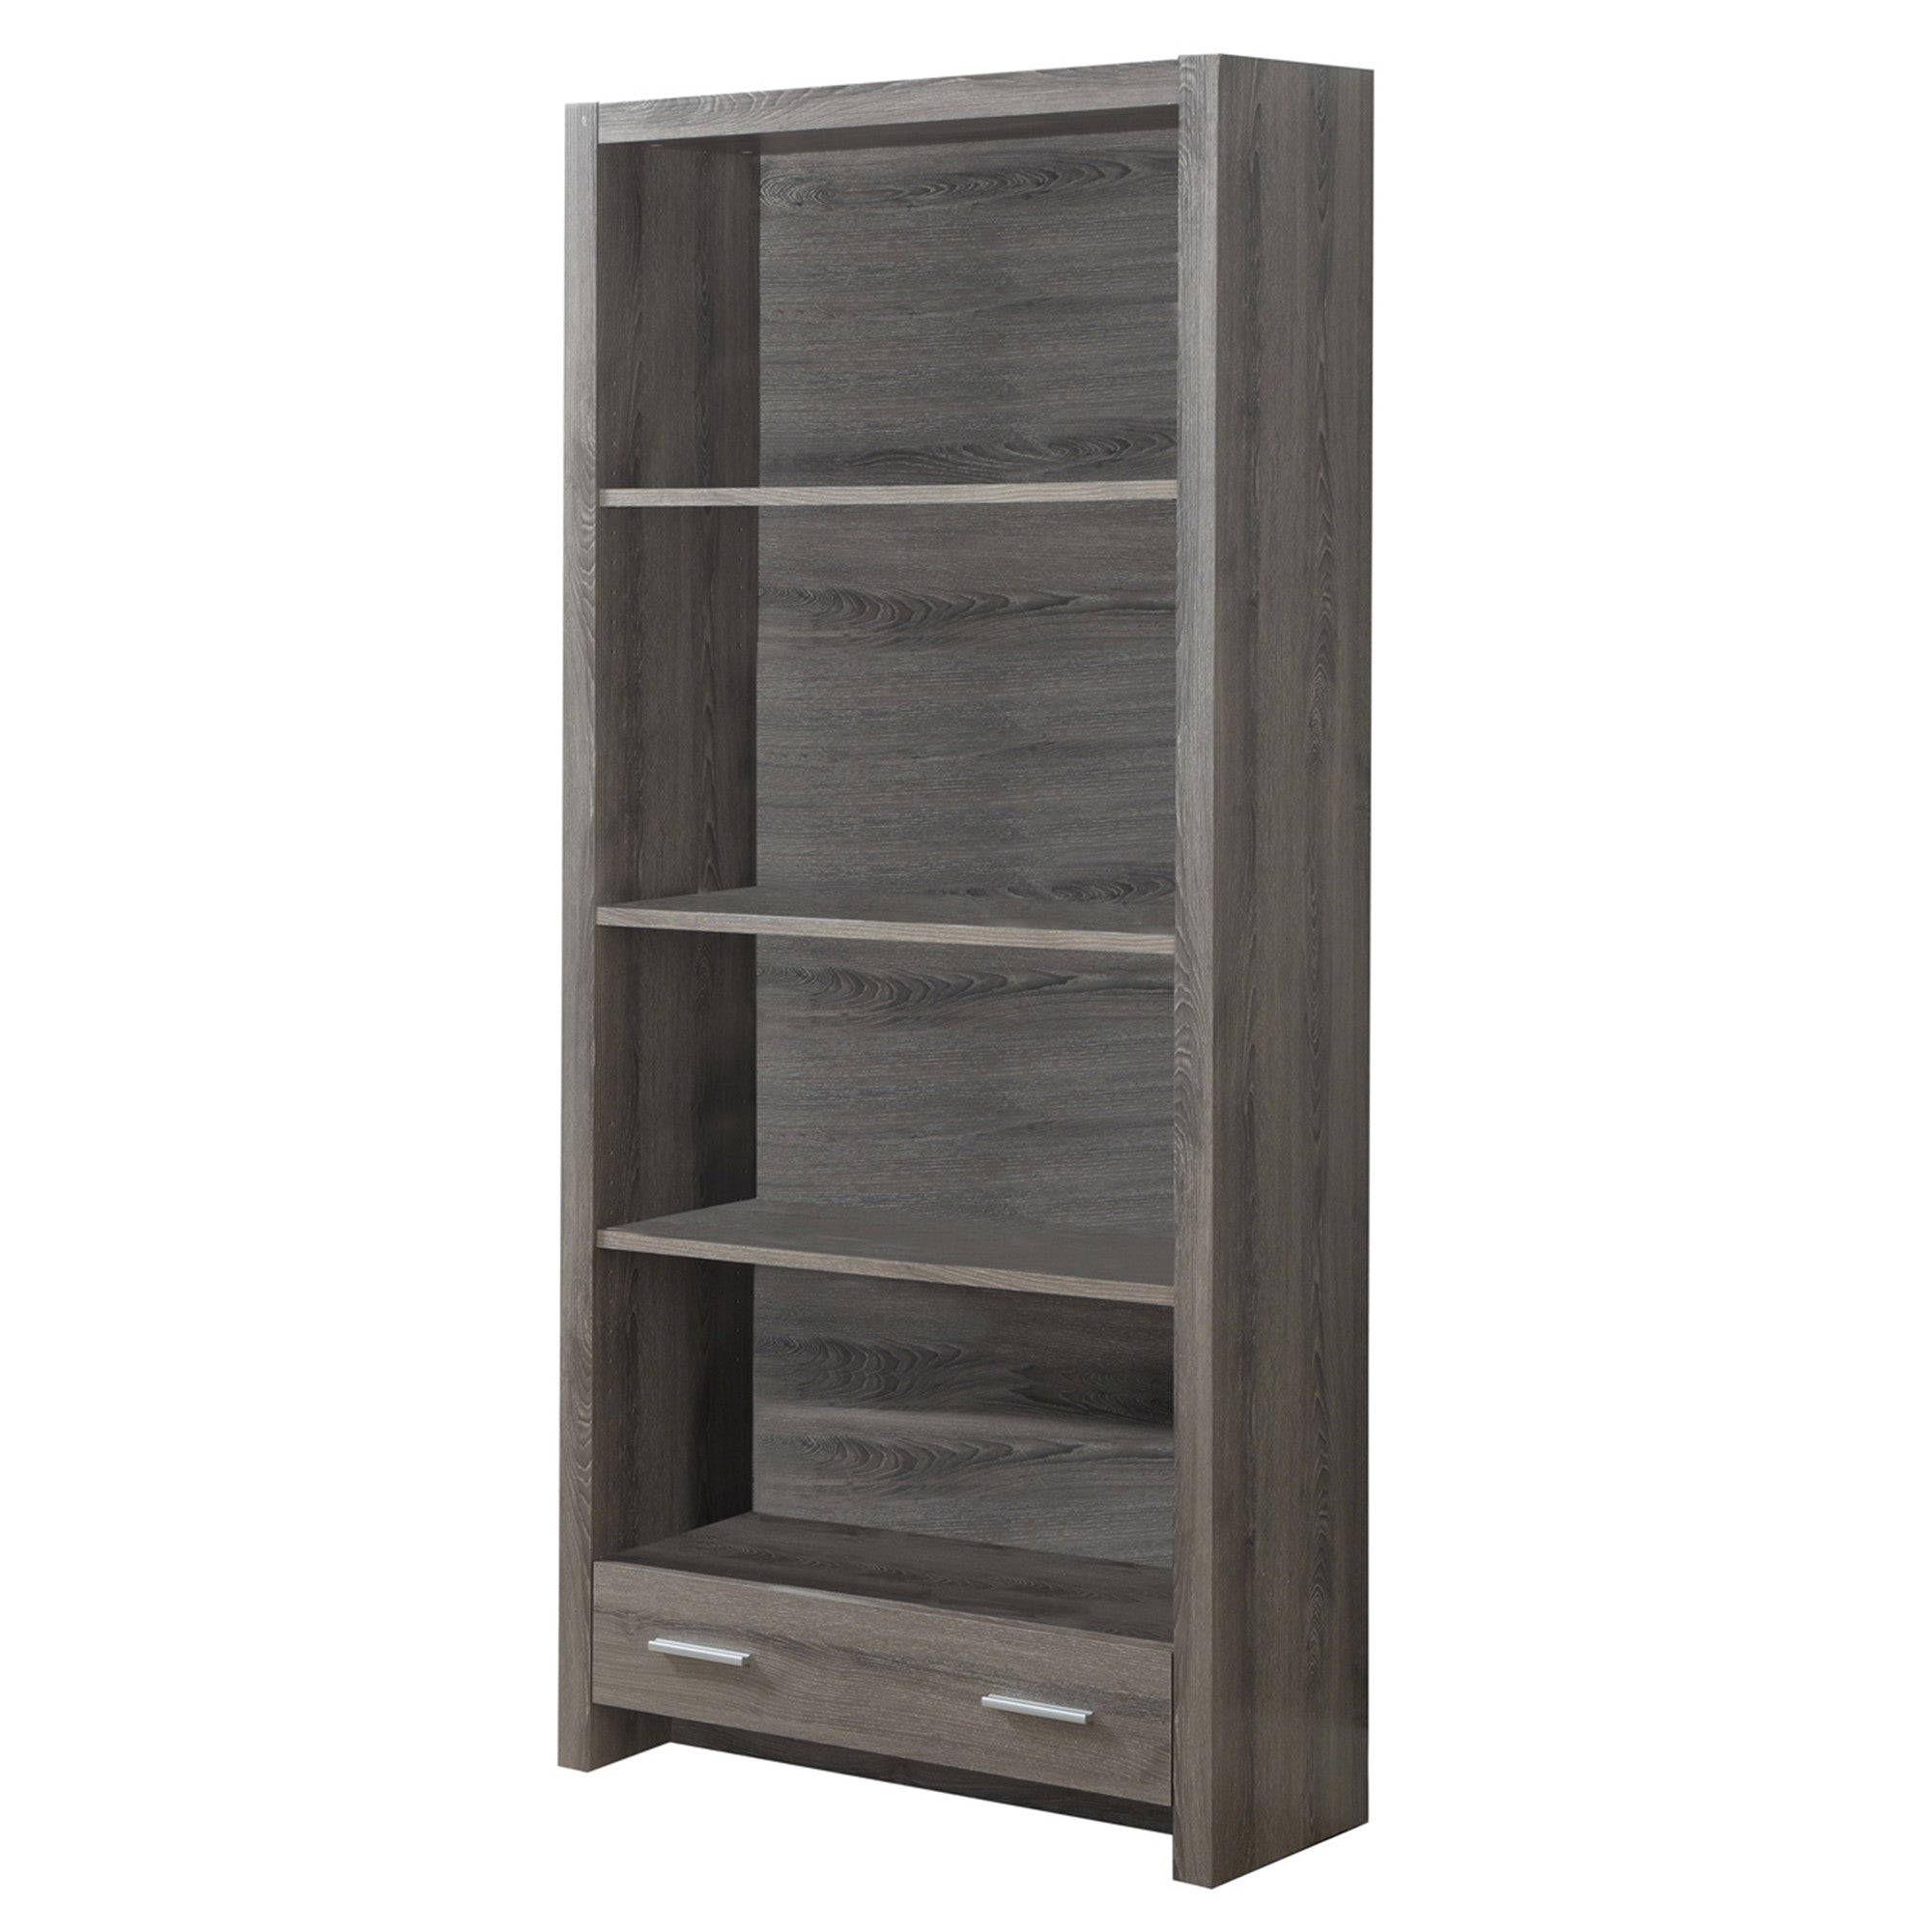 71" Taupe Wood Barrister Bookcase With a drawer